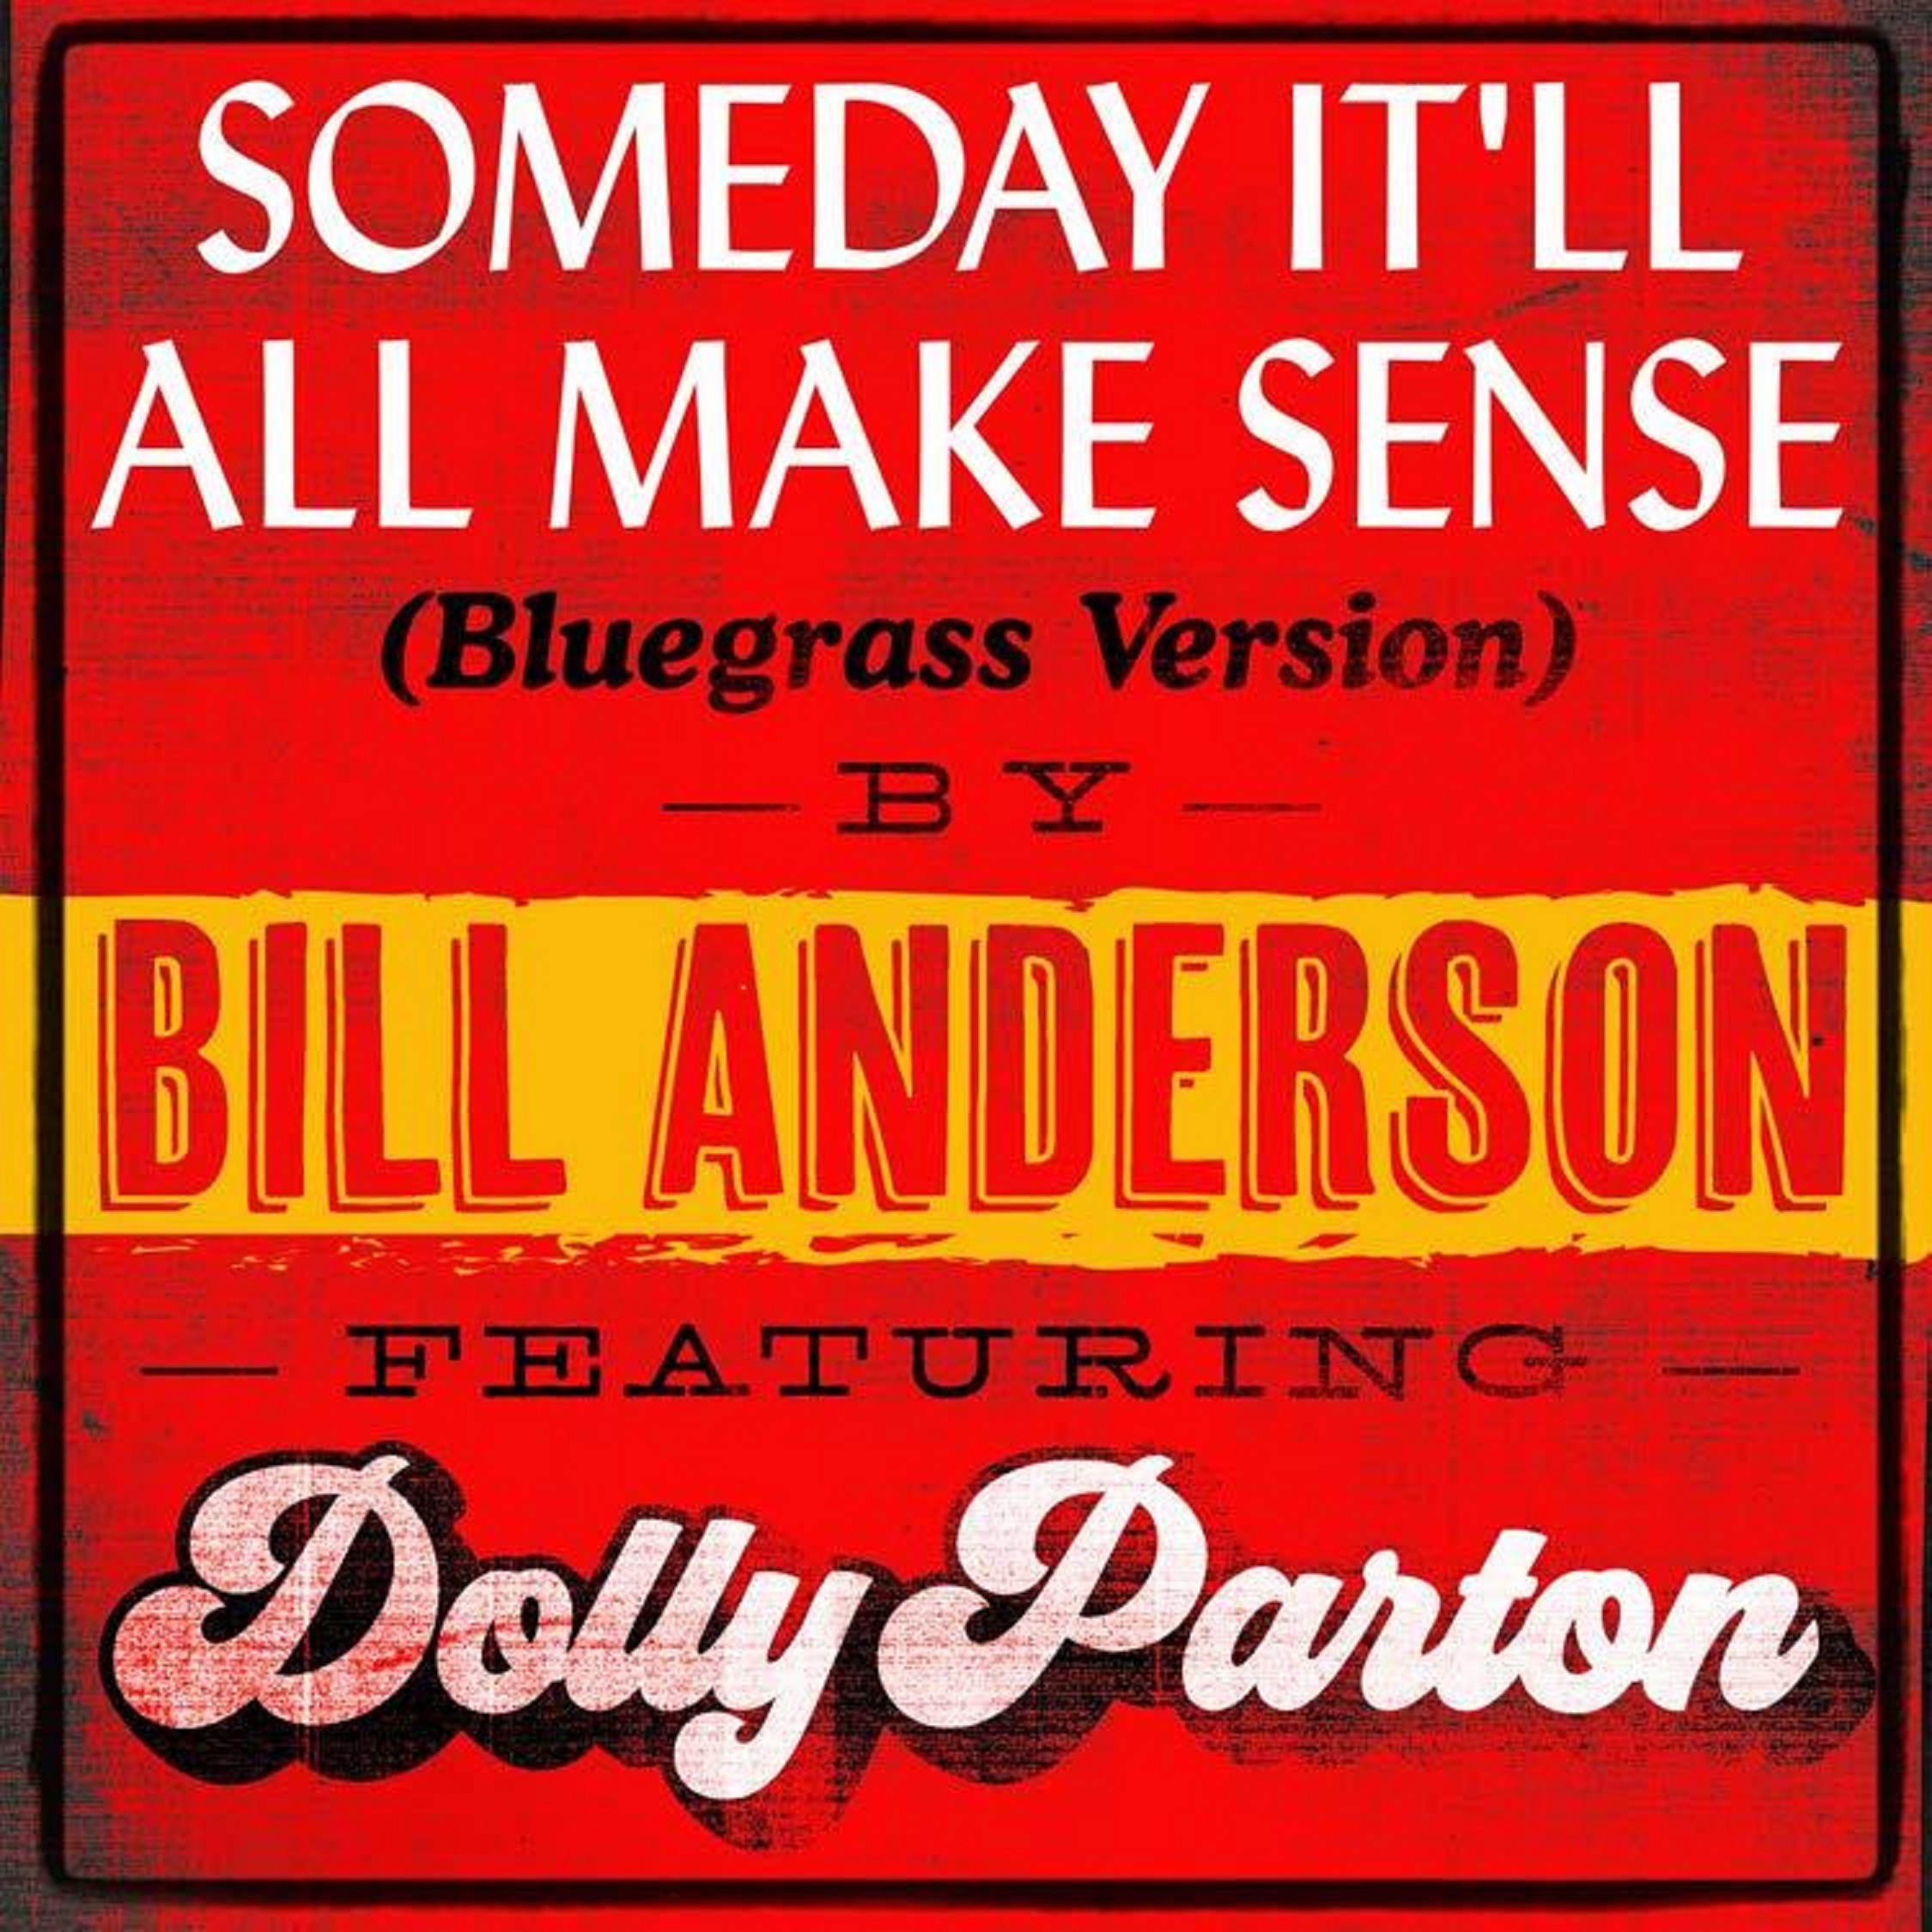 Bill Anderson and Dolly Parton Unleash Bluegrass Version of "Someday It'll All Make Sense"